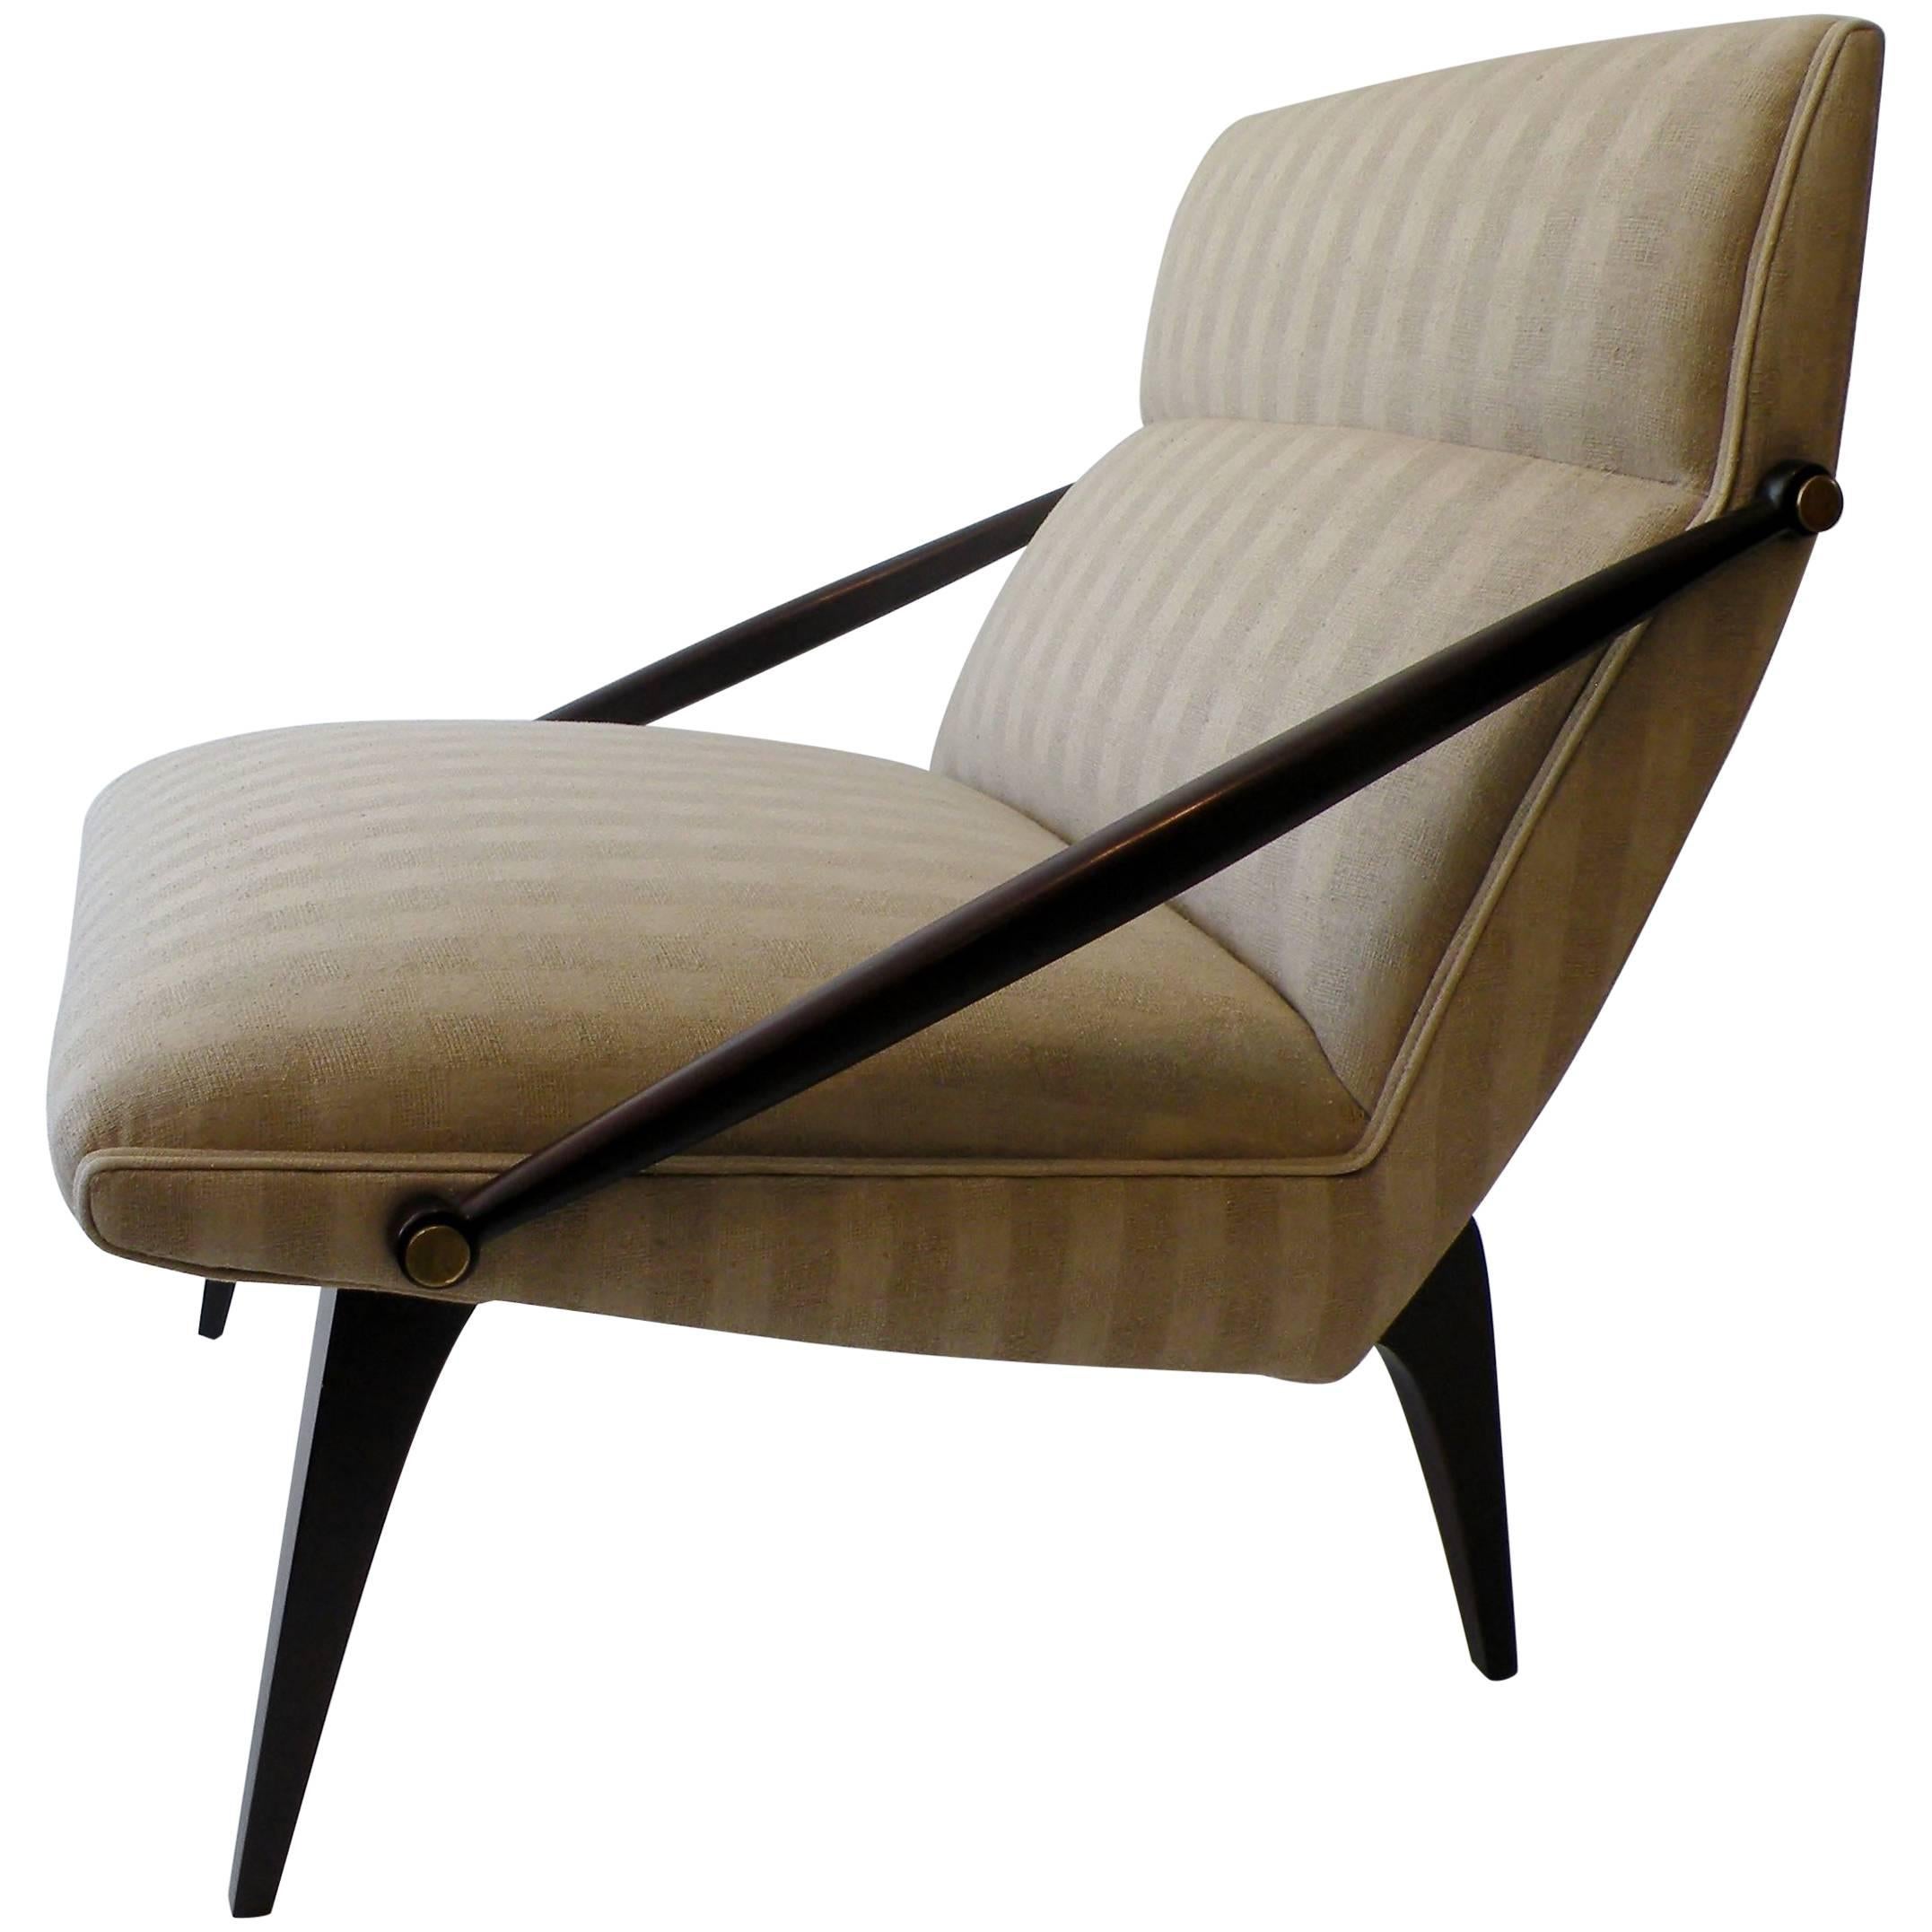 1950s Gio Ponti Style Cantilevered Lounge Chair Made by Singer & Sons